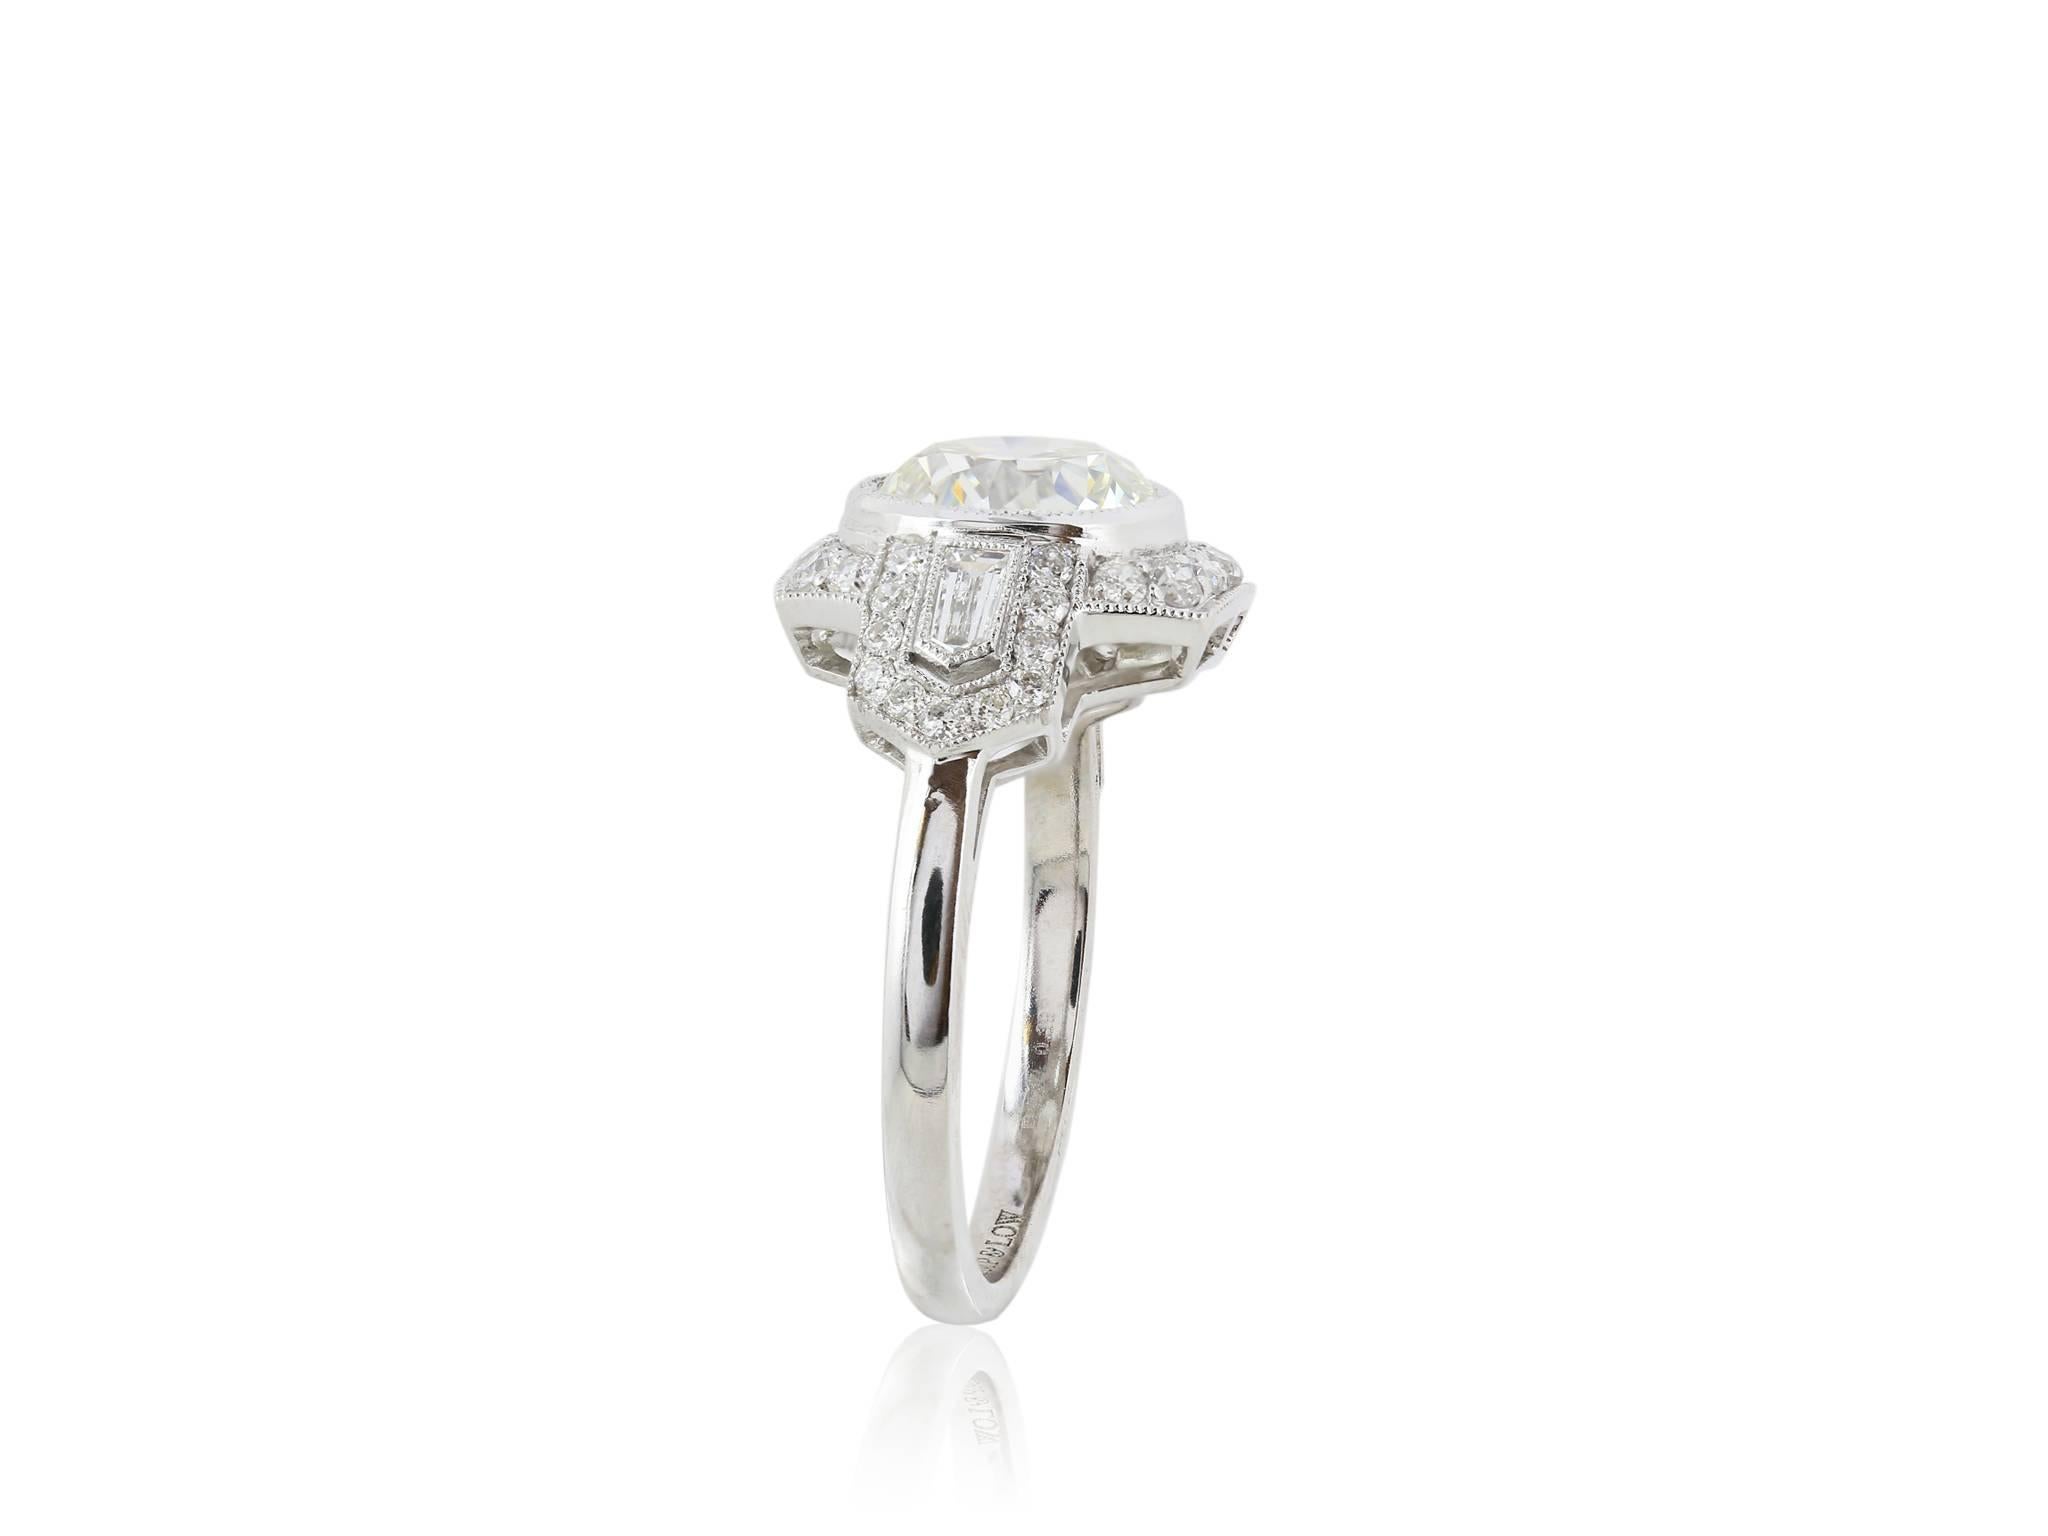 Platinum antique style ring with an intricate setting featuring 1 Old European cut diamond I/VS2 GIA cert# 2175169778  the diamonds in the mounting total a weight of .53 carats. the ring is a size 6.6